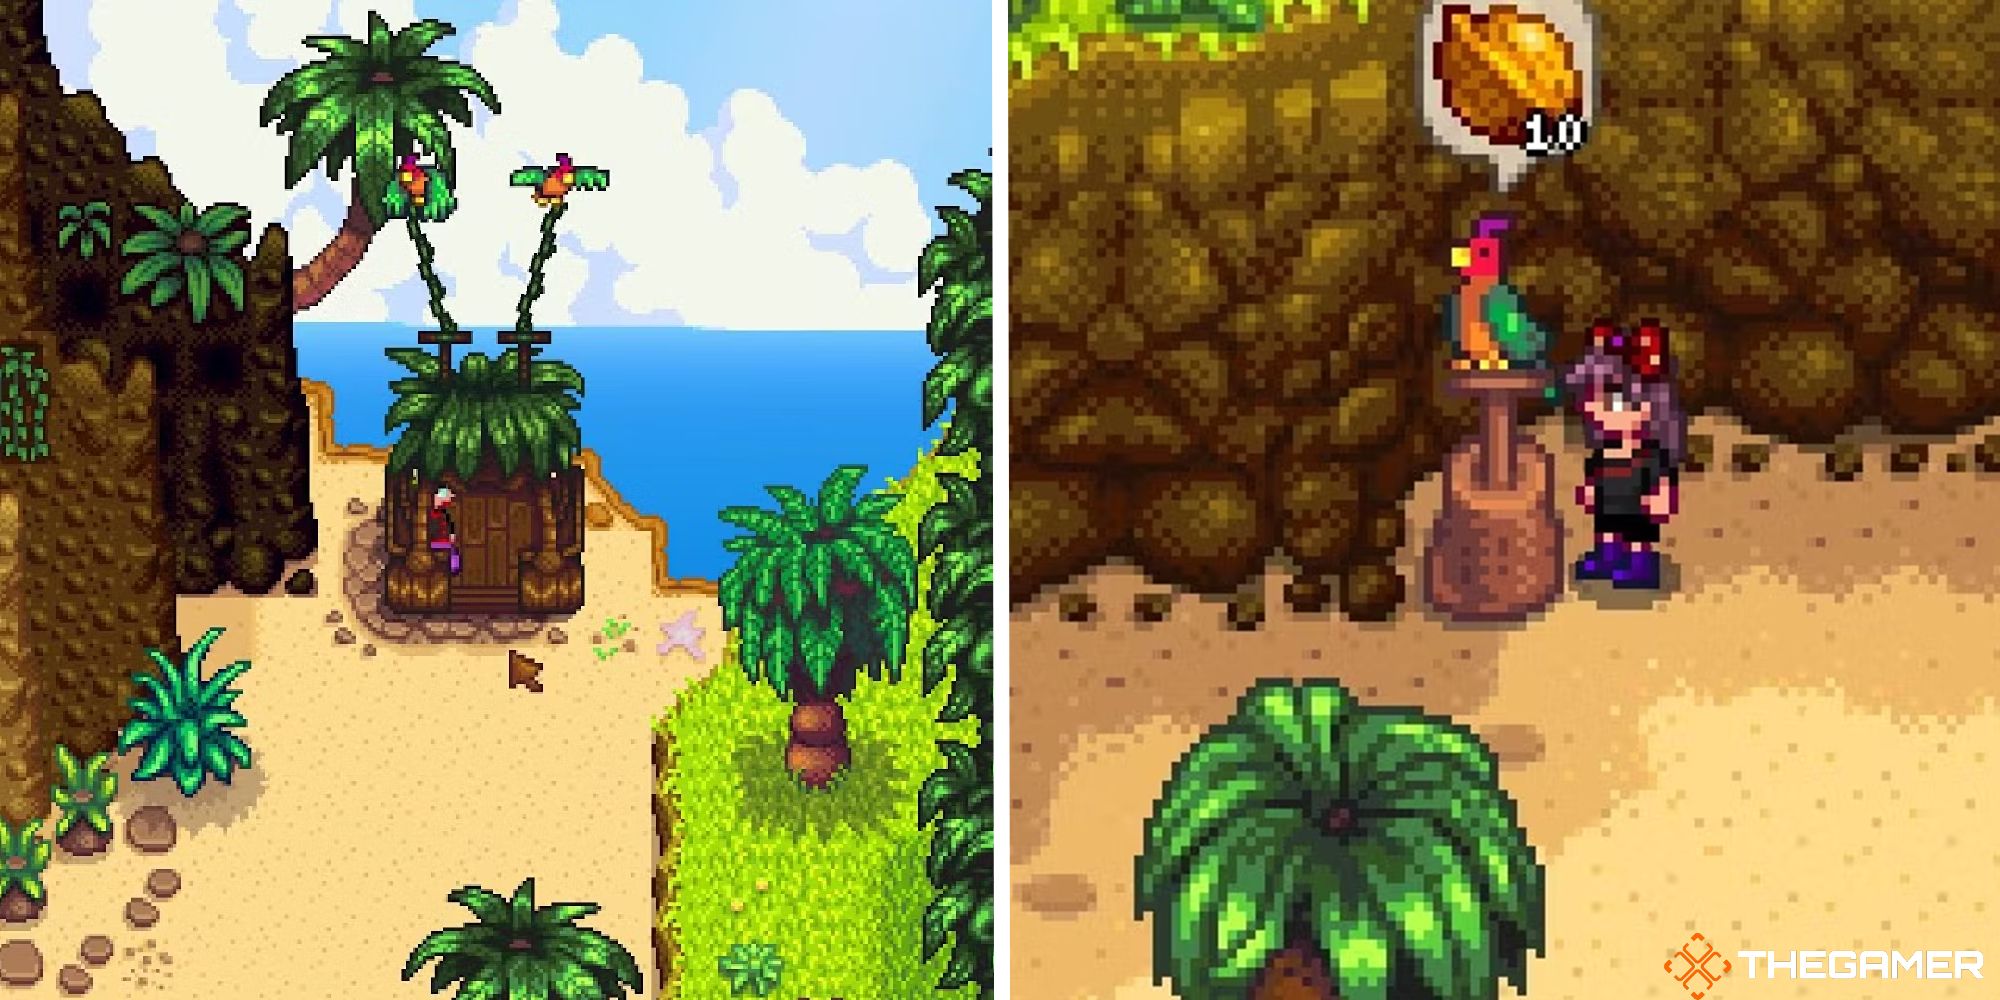 stardew valley split image showing parrot express next to image of player talking to a parrot requesting a golden walnut